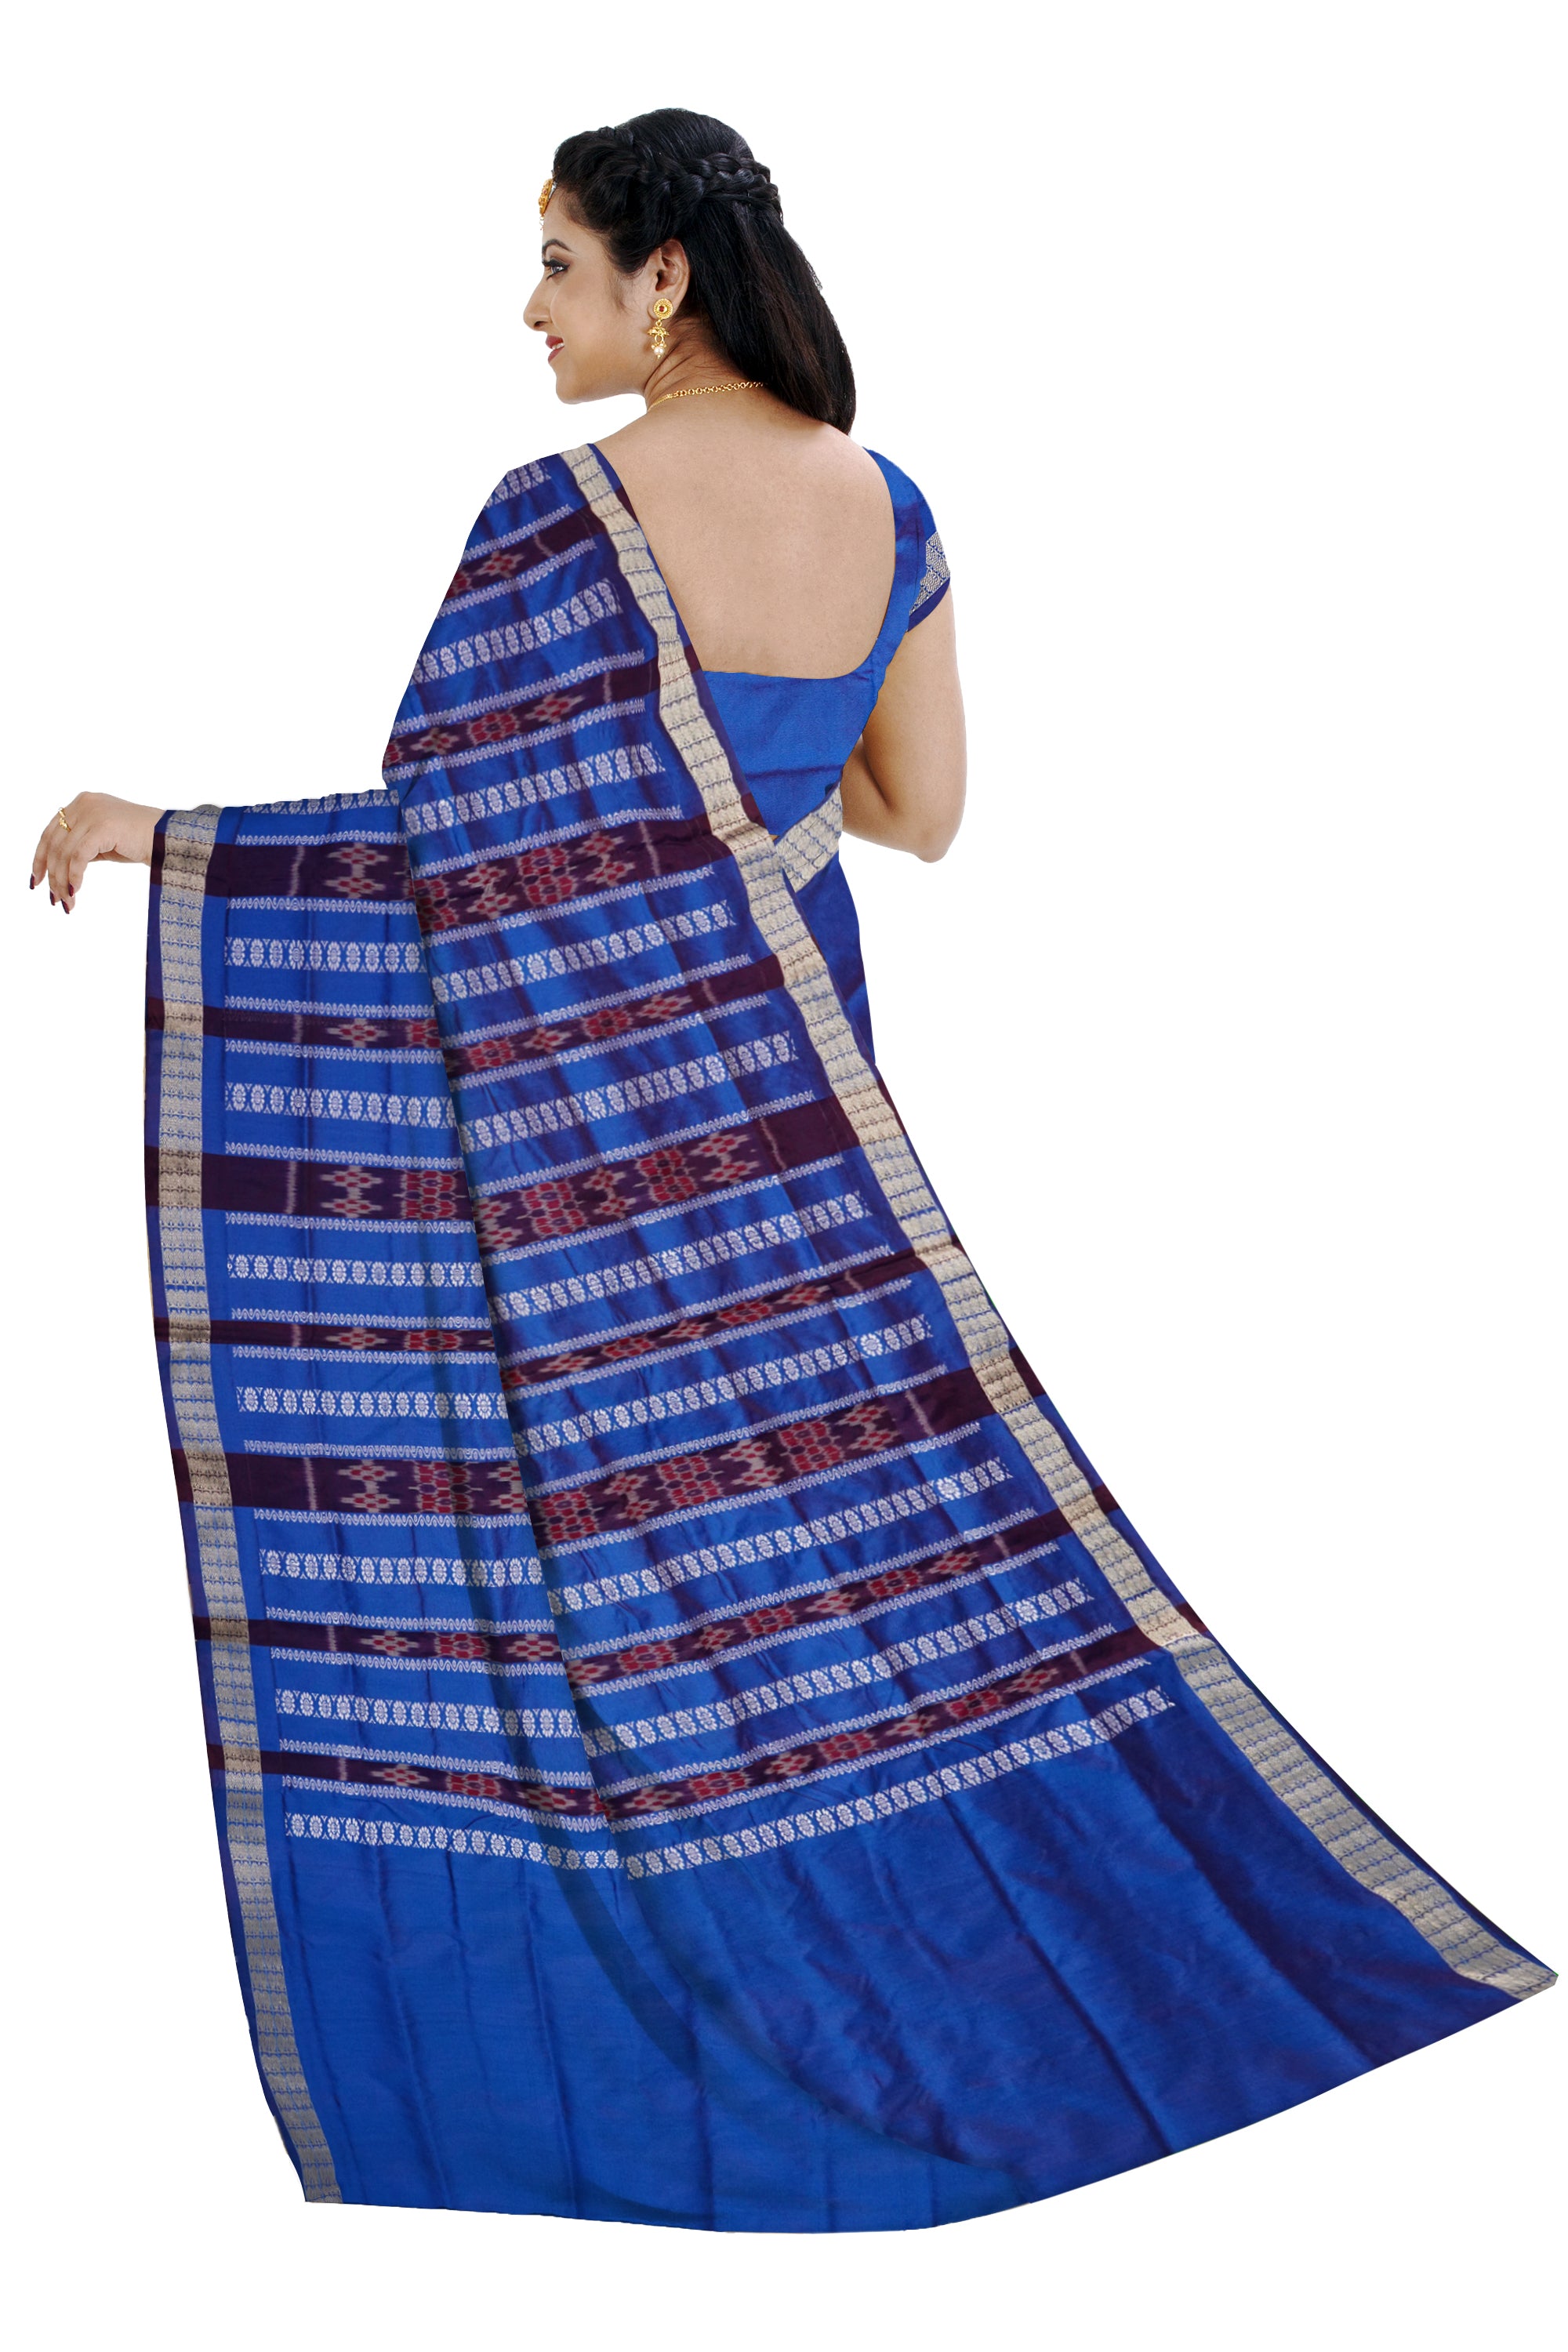 Purple and Blue terracotta patli pata saree with floral pattern, includes matching blouse for a coordinated ensemble. - Koshali Arts & Crafts Enterprise